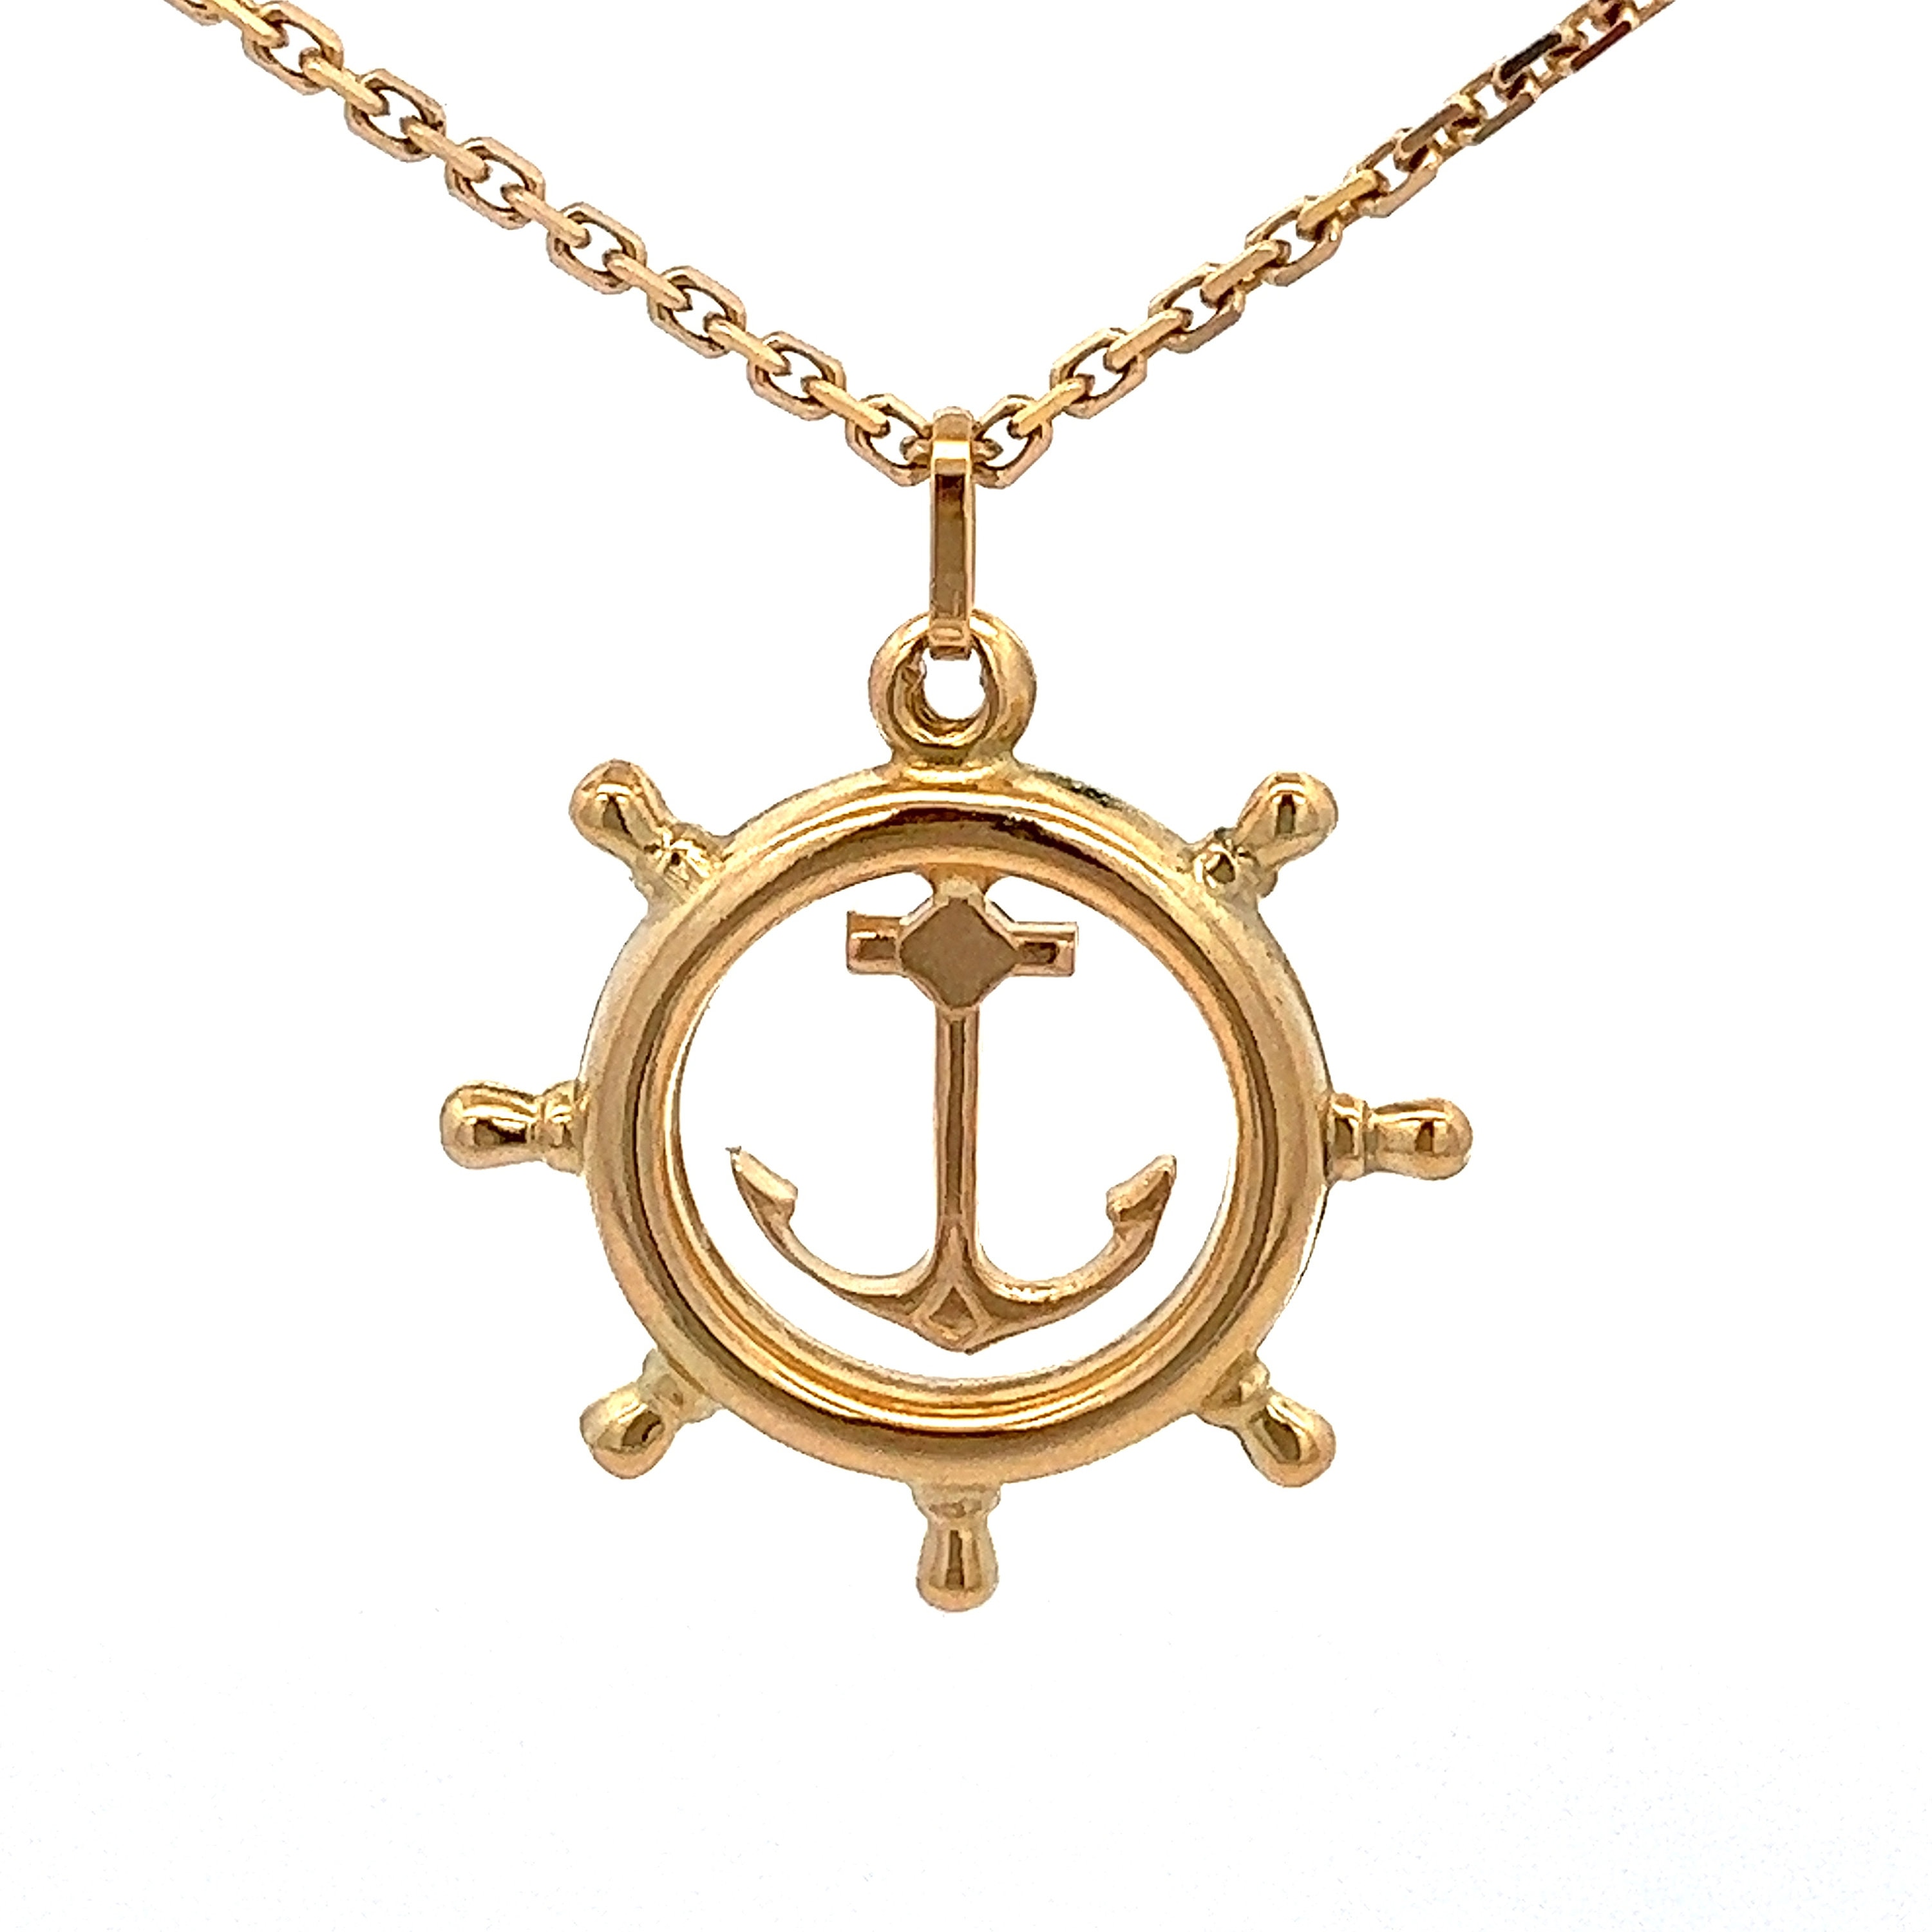 Review: Nautical Ship Wheel Charms - Keely's Nails